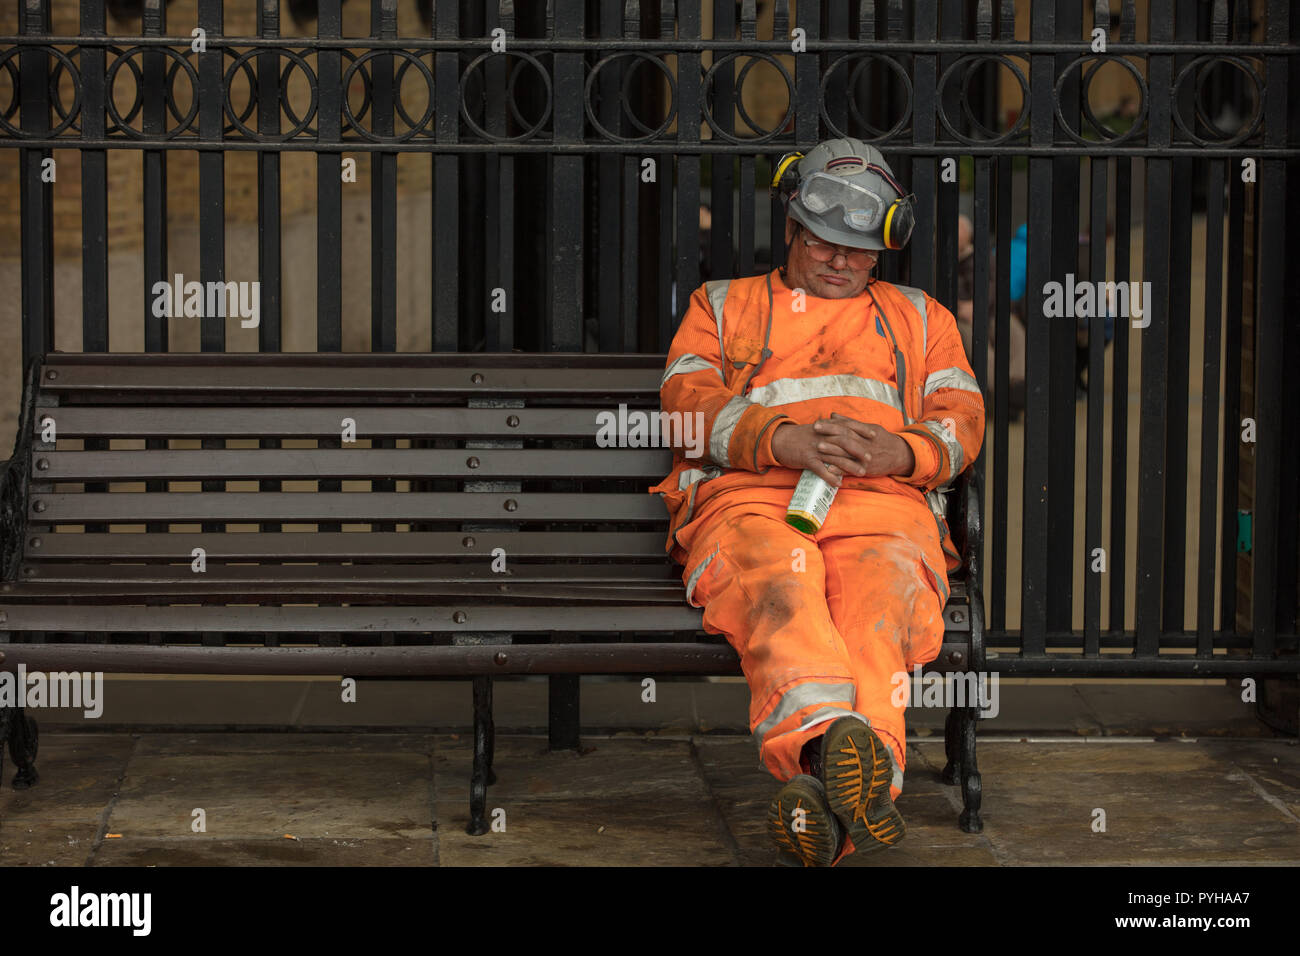 Construction worker, working in one of the new residential developments on the south bank of the river Thames, London, UK, has late afternoon nap. Stock Photo